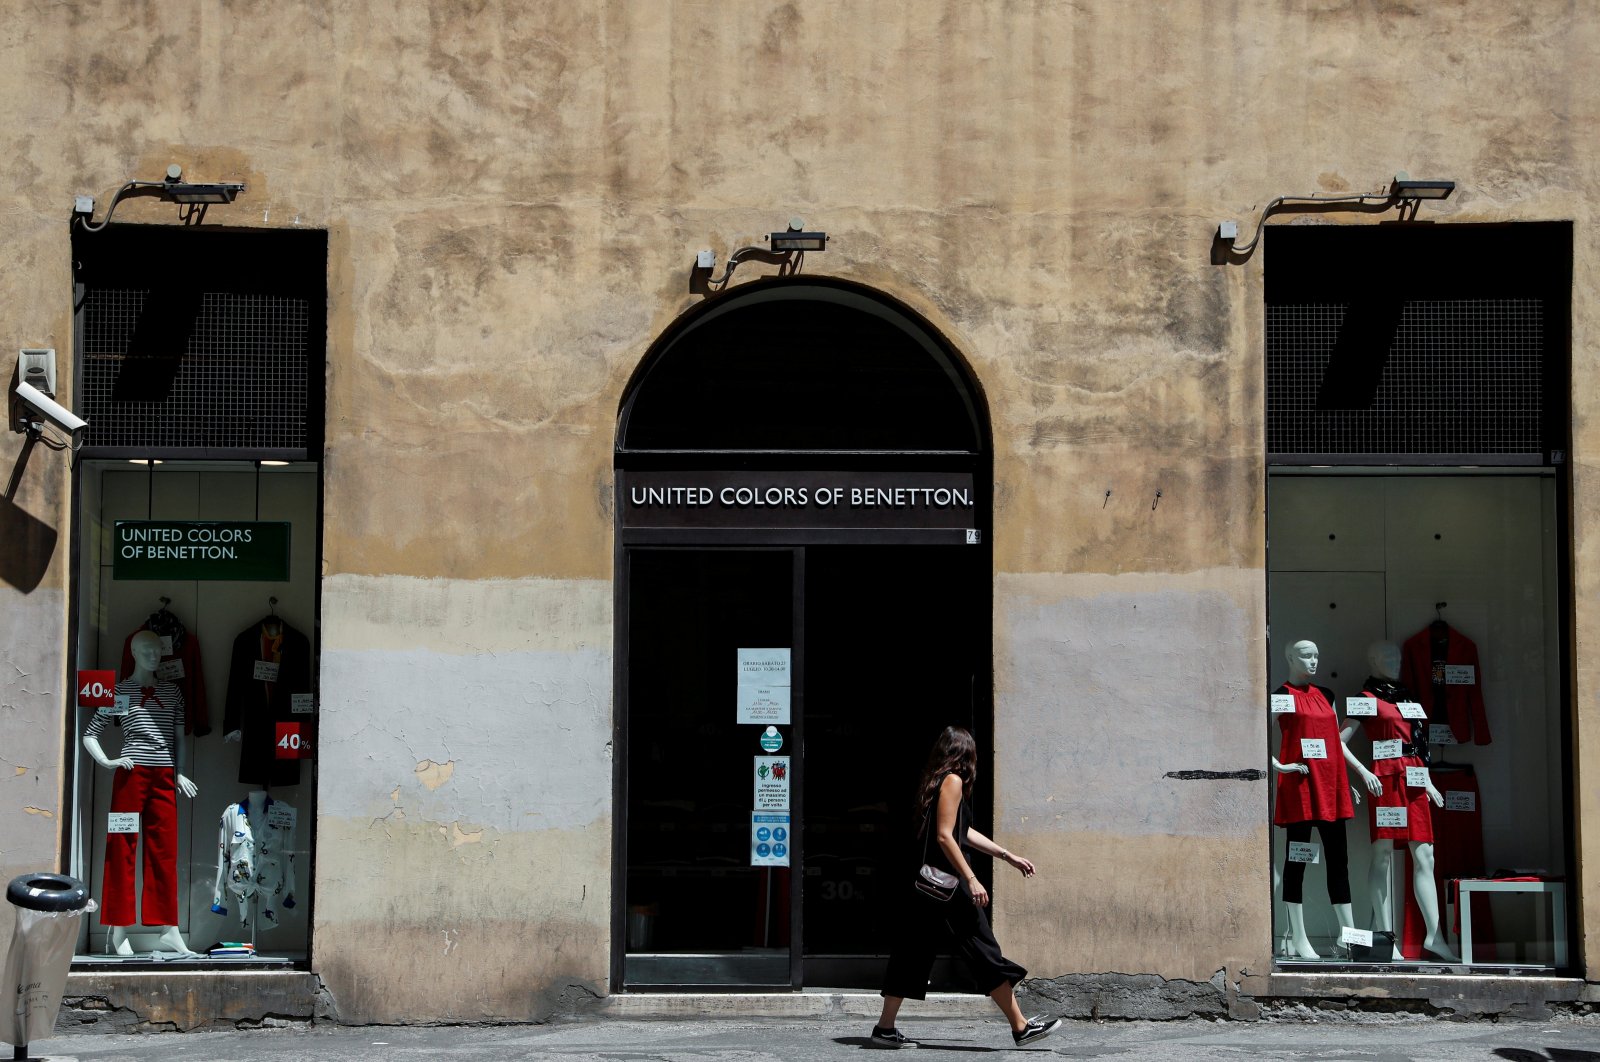 A woman walks past of United Colors of Benetton store in Rome, Italy, July 21, 2020. (Reuters Photo)